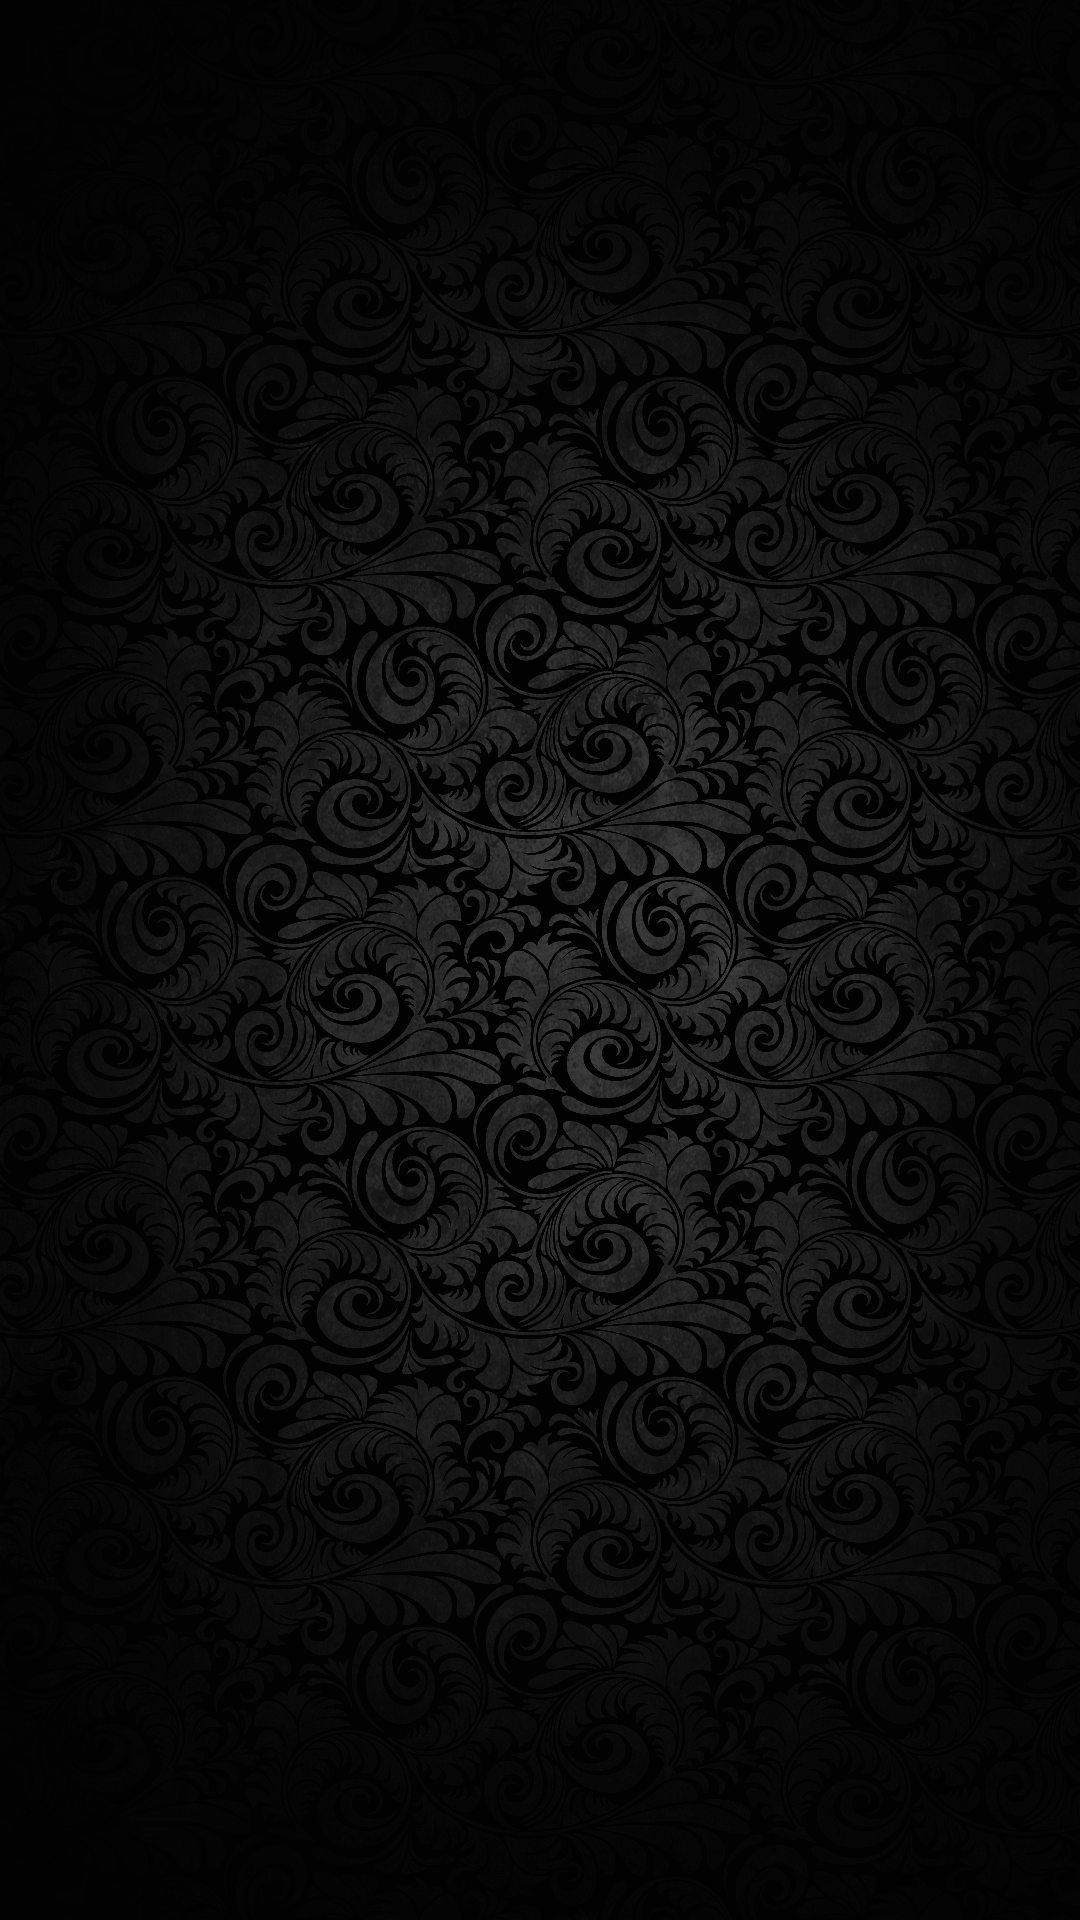 70 HD Black And White Wallpapers For Free Download Resolution 1080p